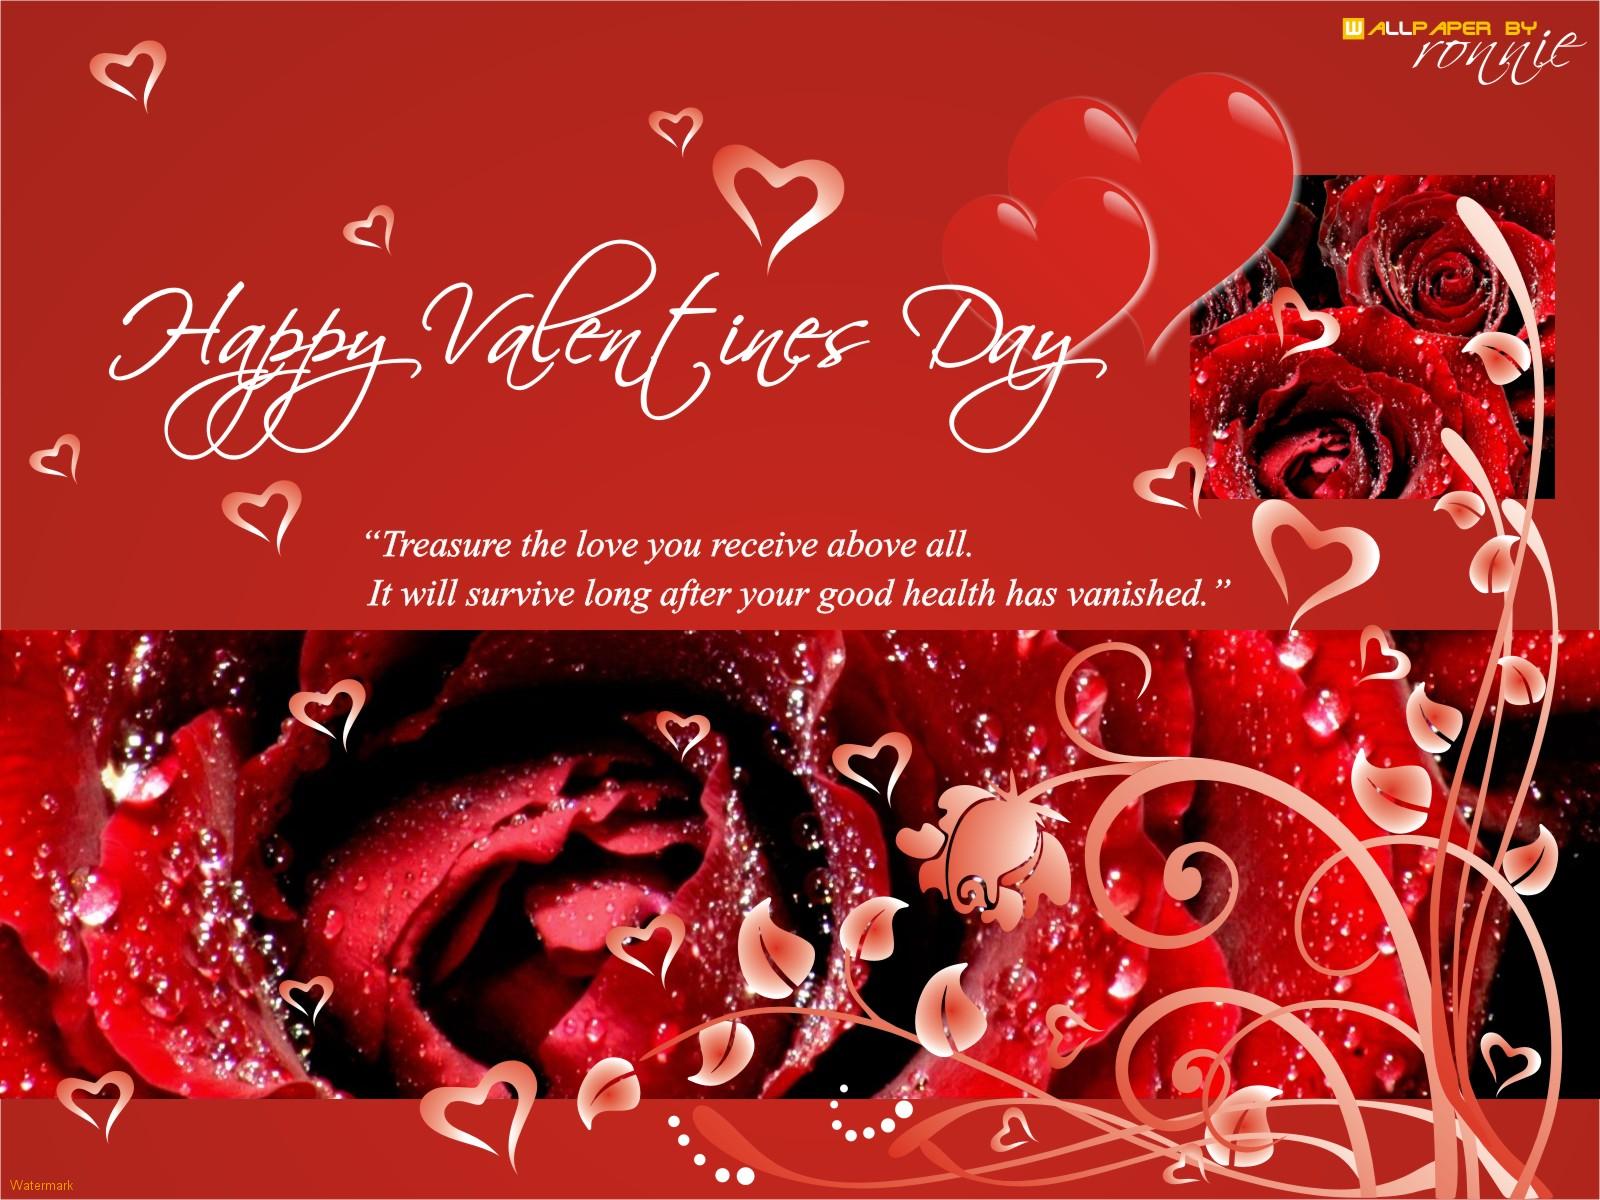 Valentine Day SMS and Valentine Day Messages1600 x 1200